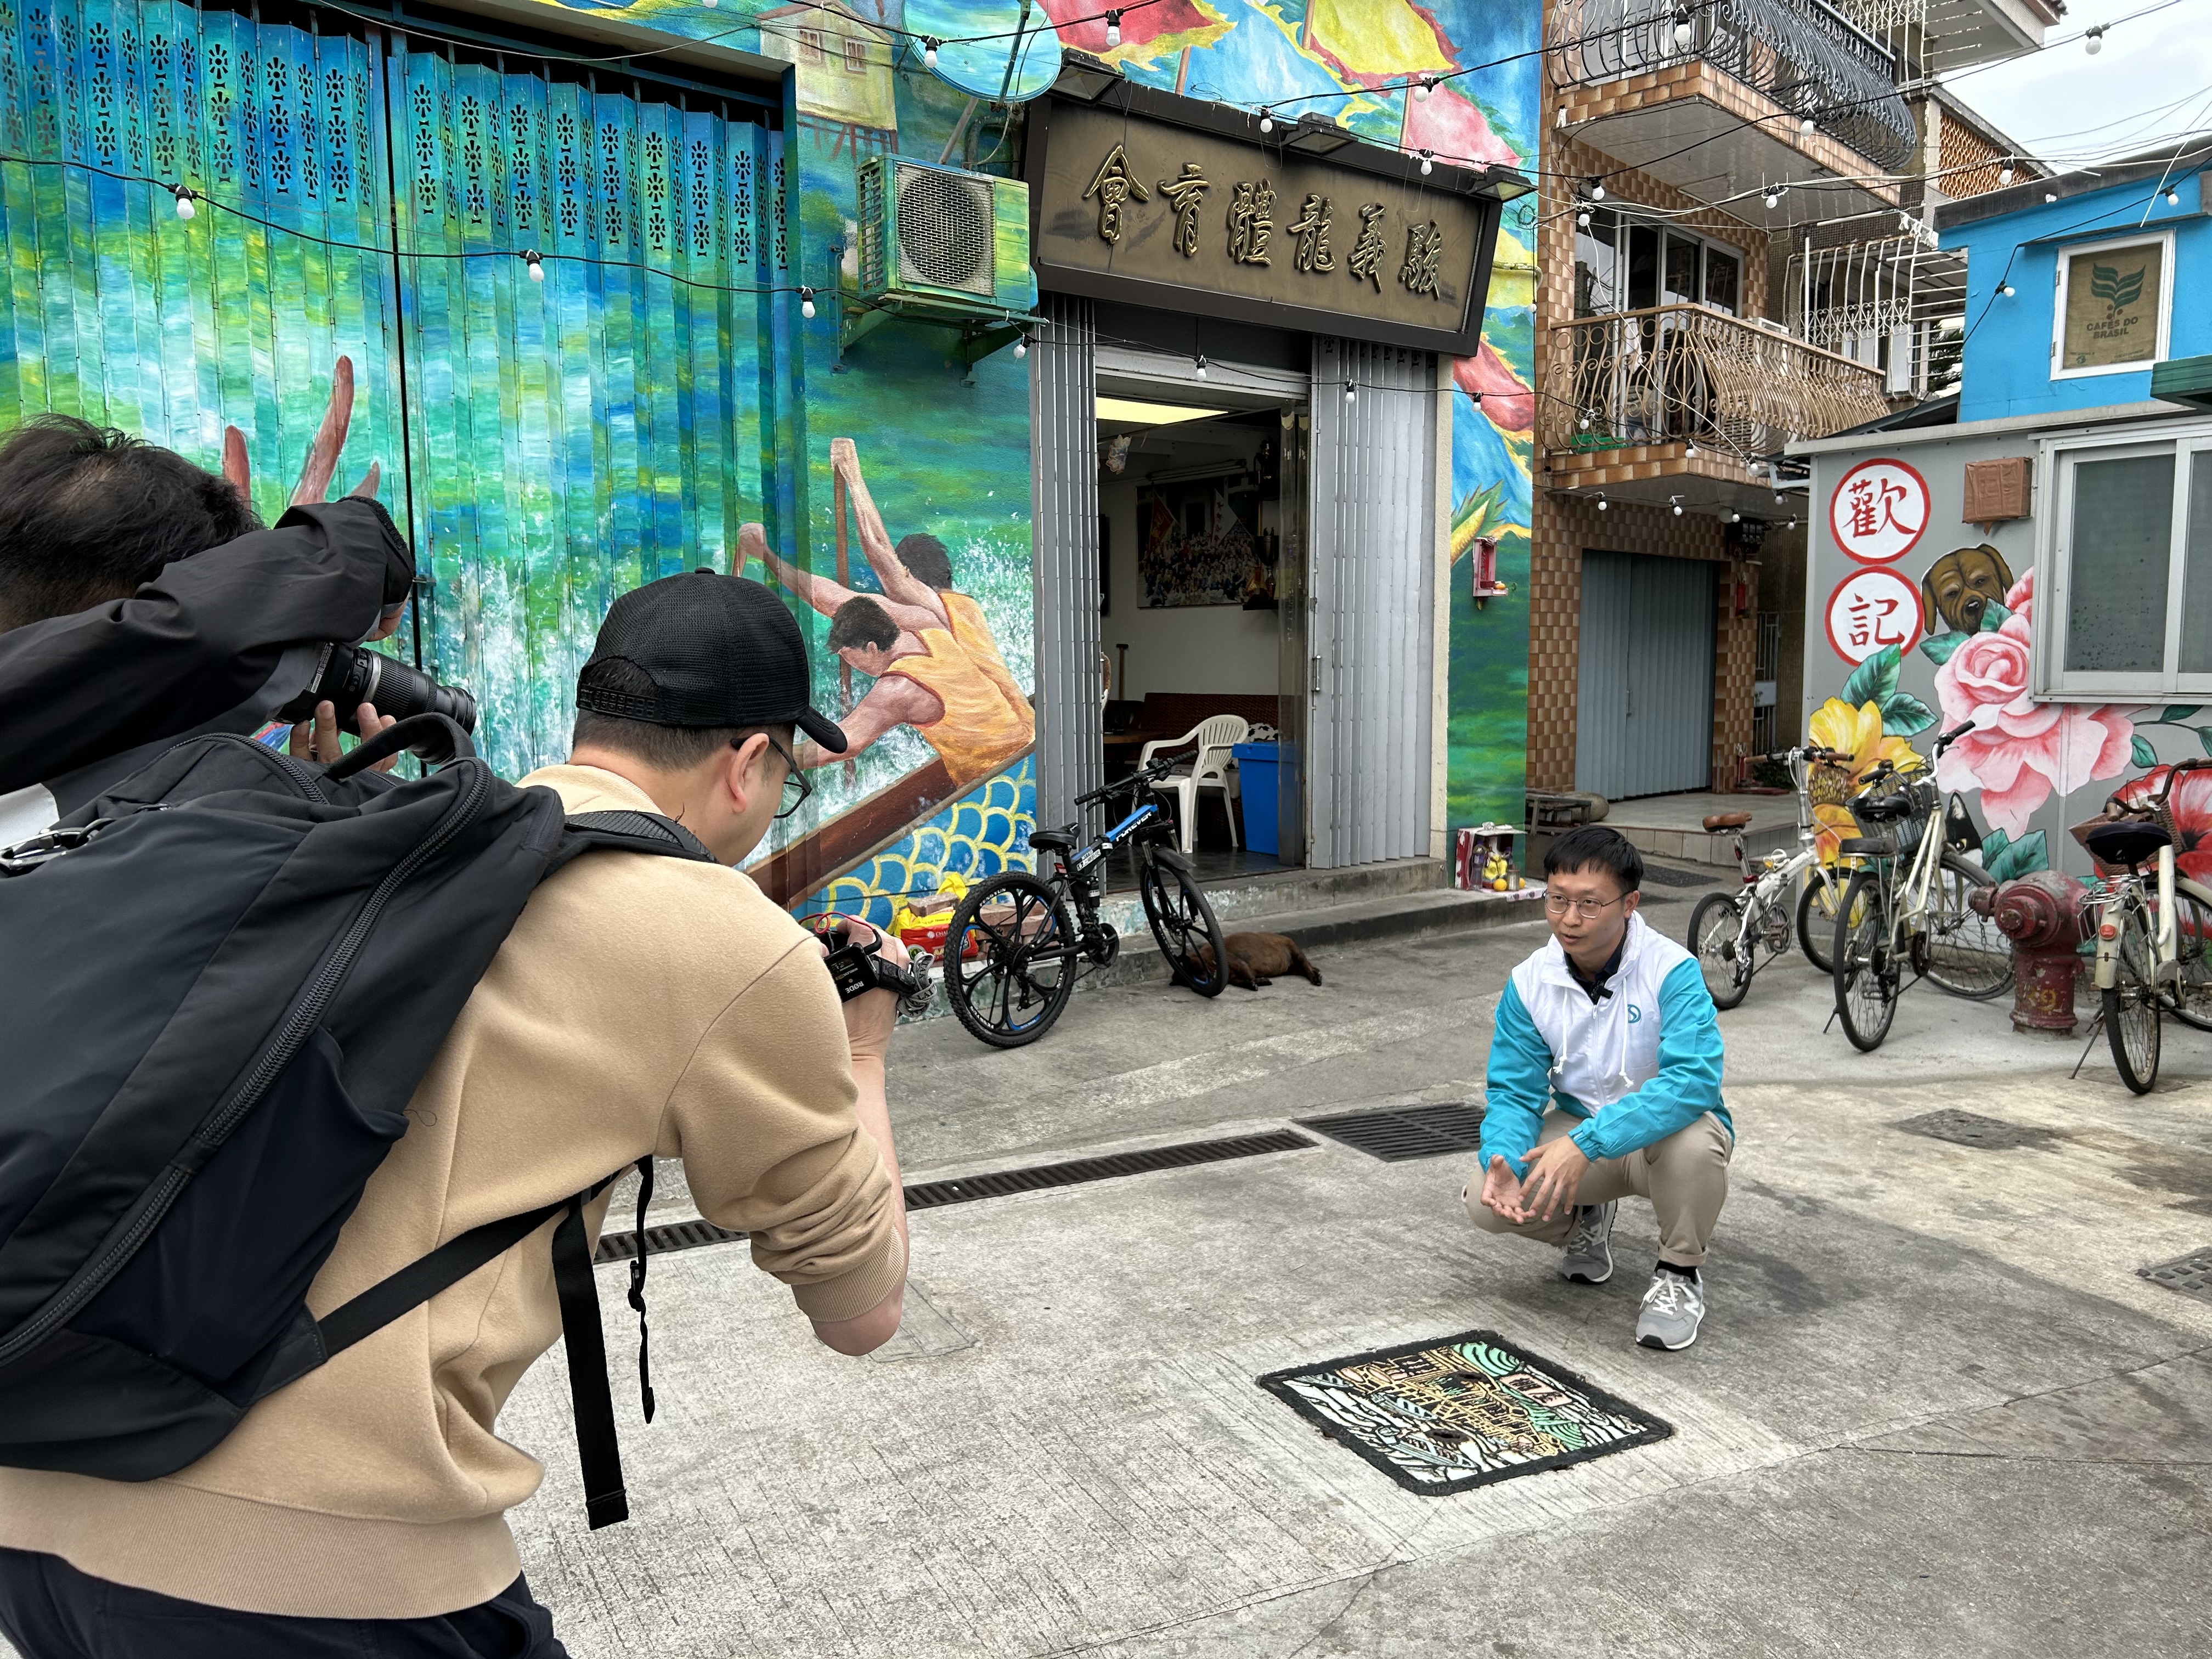 DSD Engineer, Mr Peter LING Ho-yin, introduced the thematic manhole covers in Tai O during the interview by Ta Kung Pao